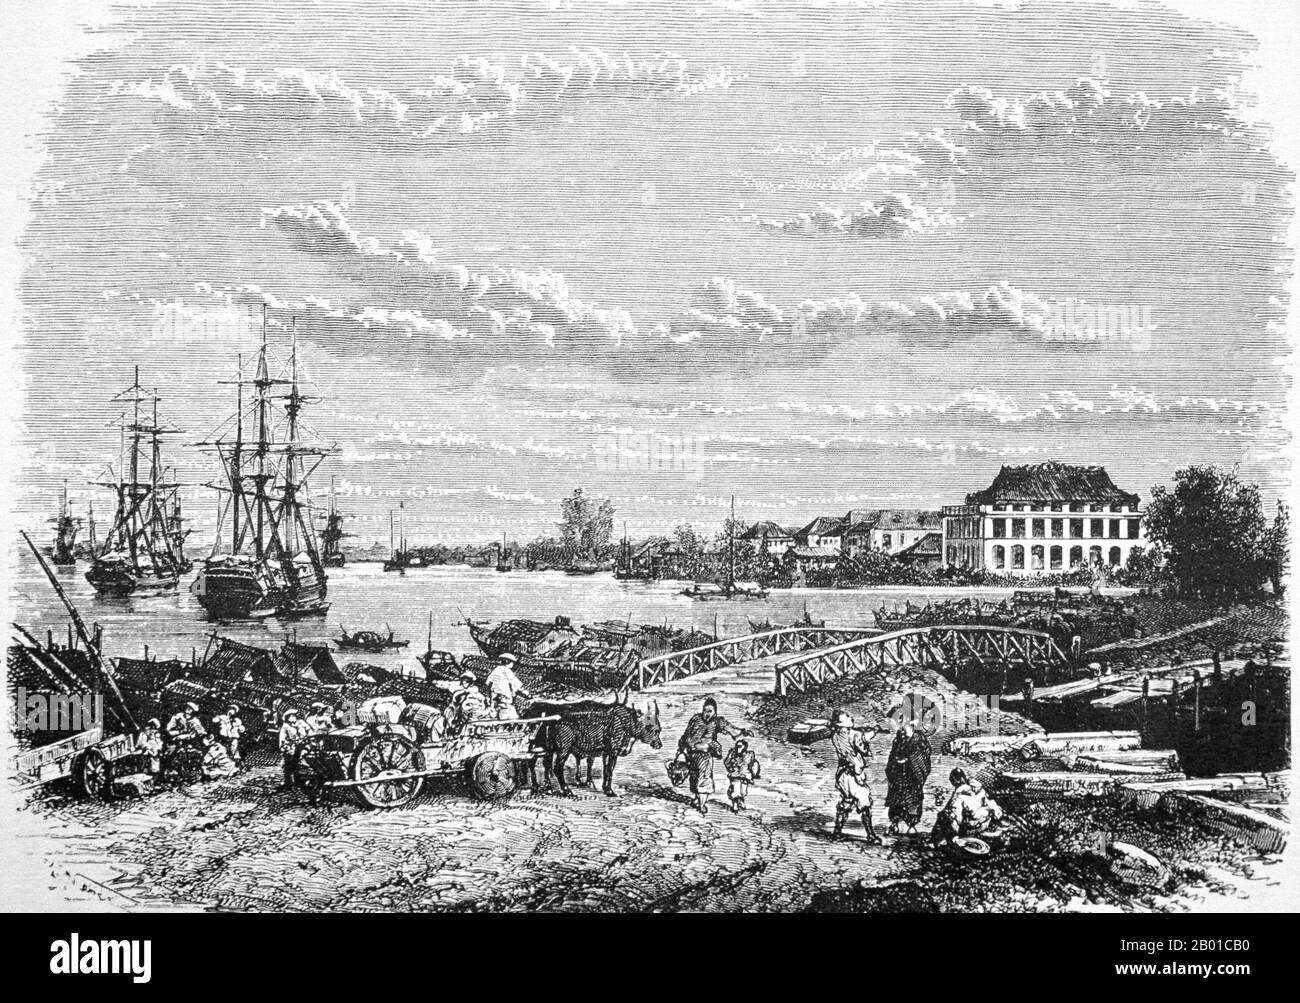 Vietnam: A view of the port of Saigon. Engraving by Theodor Alexander Weber (11 May 1838 - March 1907), 1872.  Ho Chi Minh City (Vietnamese: Thành phố Hồ Chí Minh, better known as Saigon (Vietnamese: Sài Gòn) is the largest city in Vietnam. It was once known as Prey Nokor, an important Khmer sea port prior to annexation by the Vietnamese in the 17th century.  Under the name Saigon, it was the capital of the French colony of Cochin-china and later of the independent state of South Vietnam from 1955 to 1975. Stock Photo